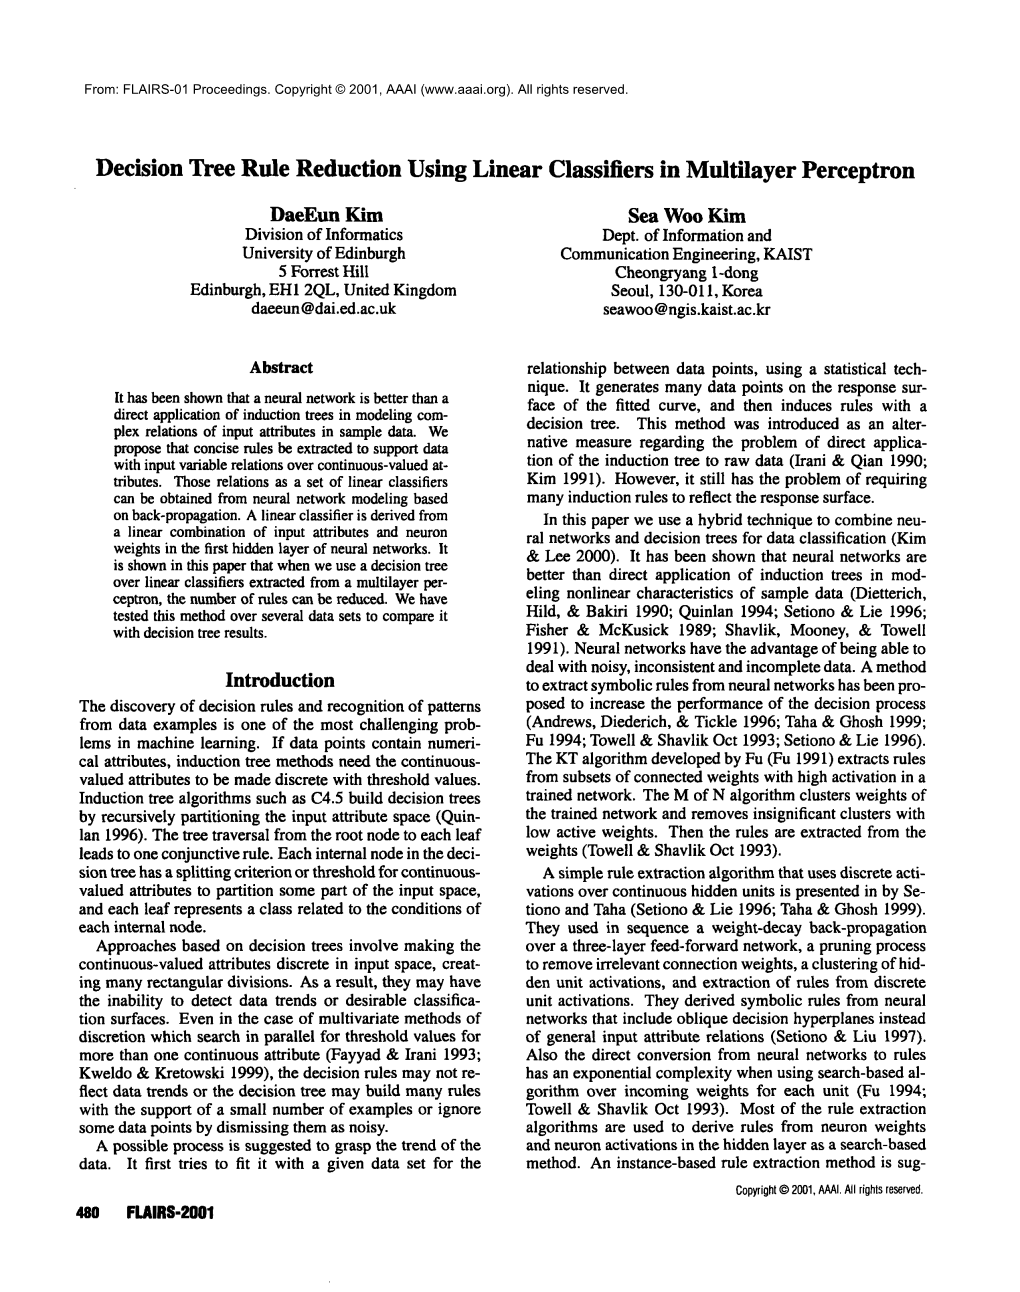 Decision Tree Rule Reduction Using Linear Classifiers in Multilayer Perceptron